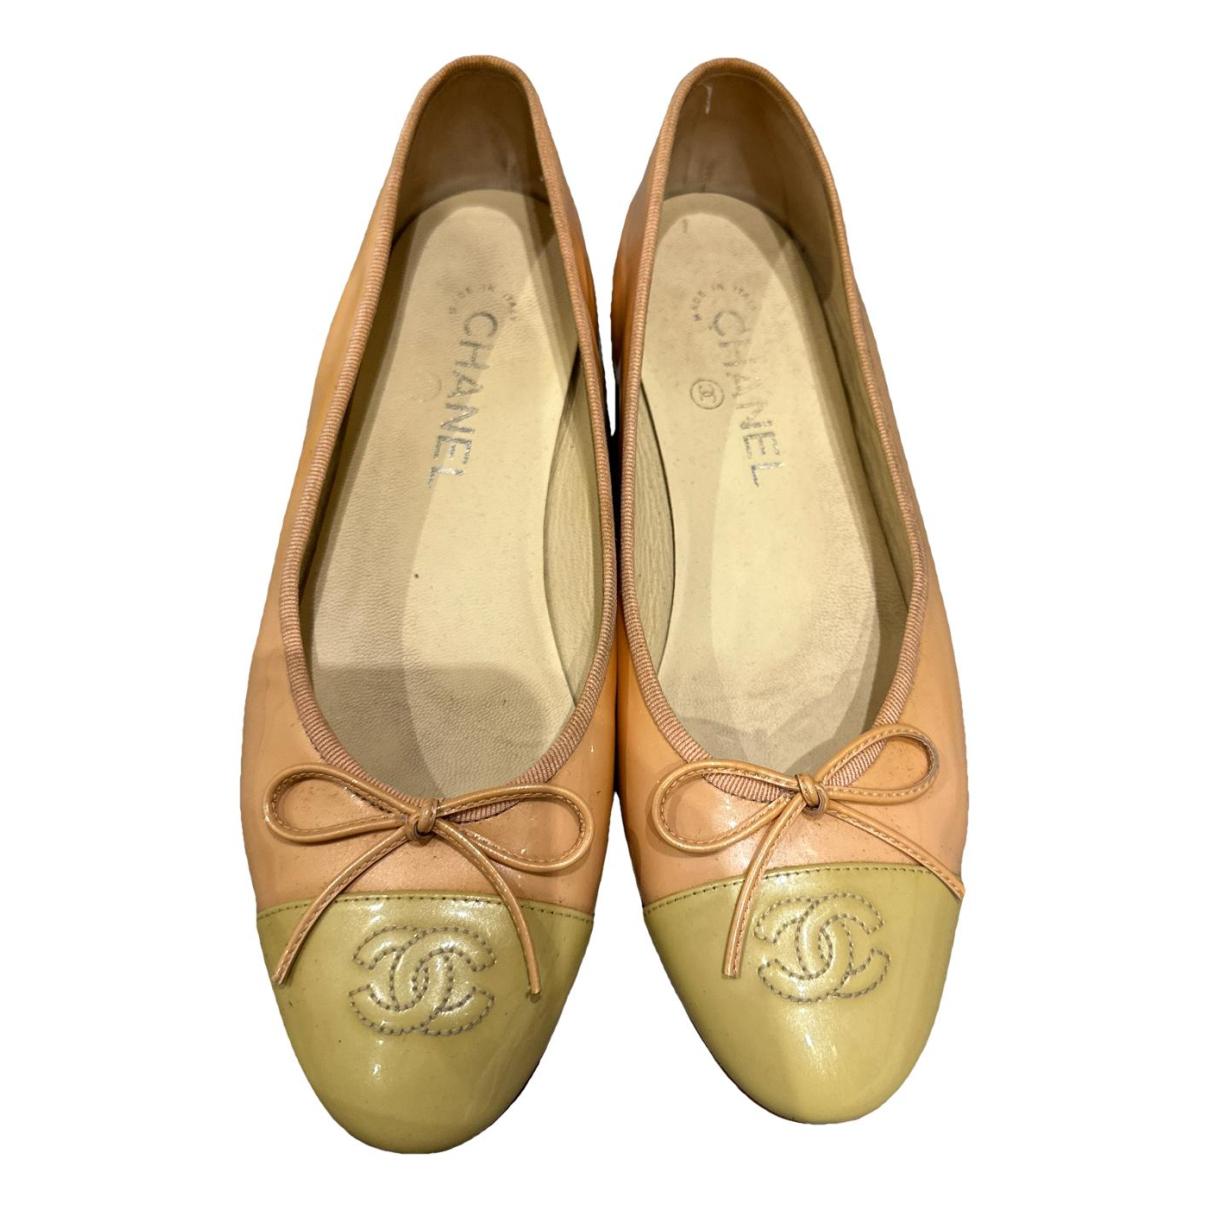 Patent leather ballet flats Chanel Beige size 38.5 EU in Patent leather -  31694143